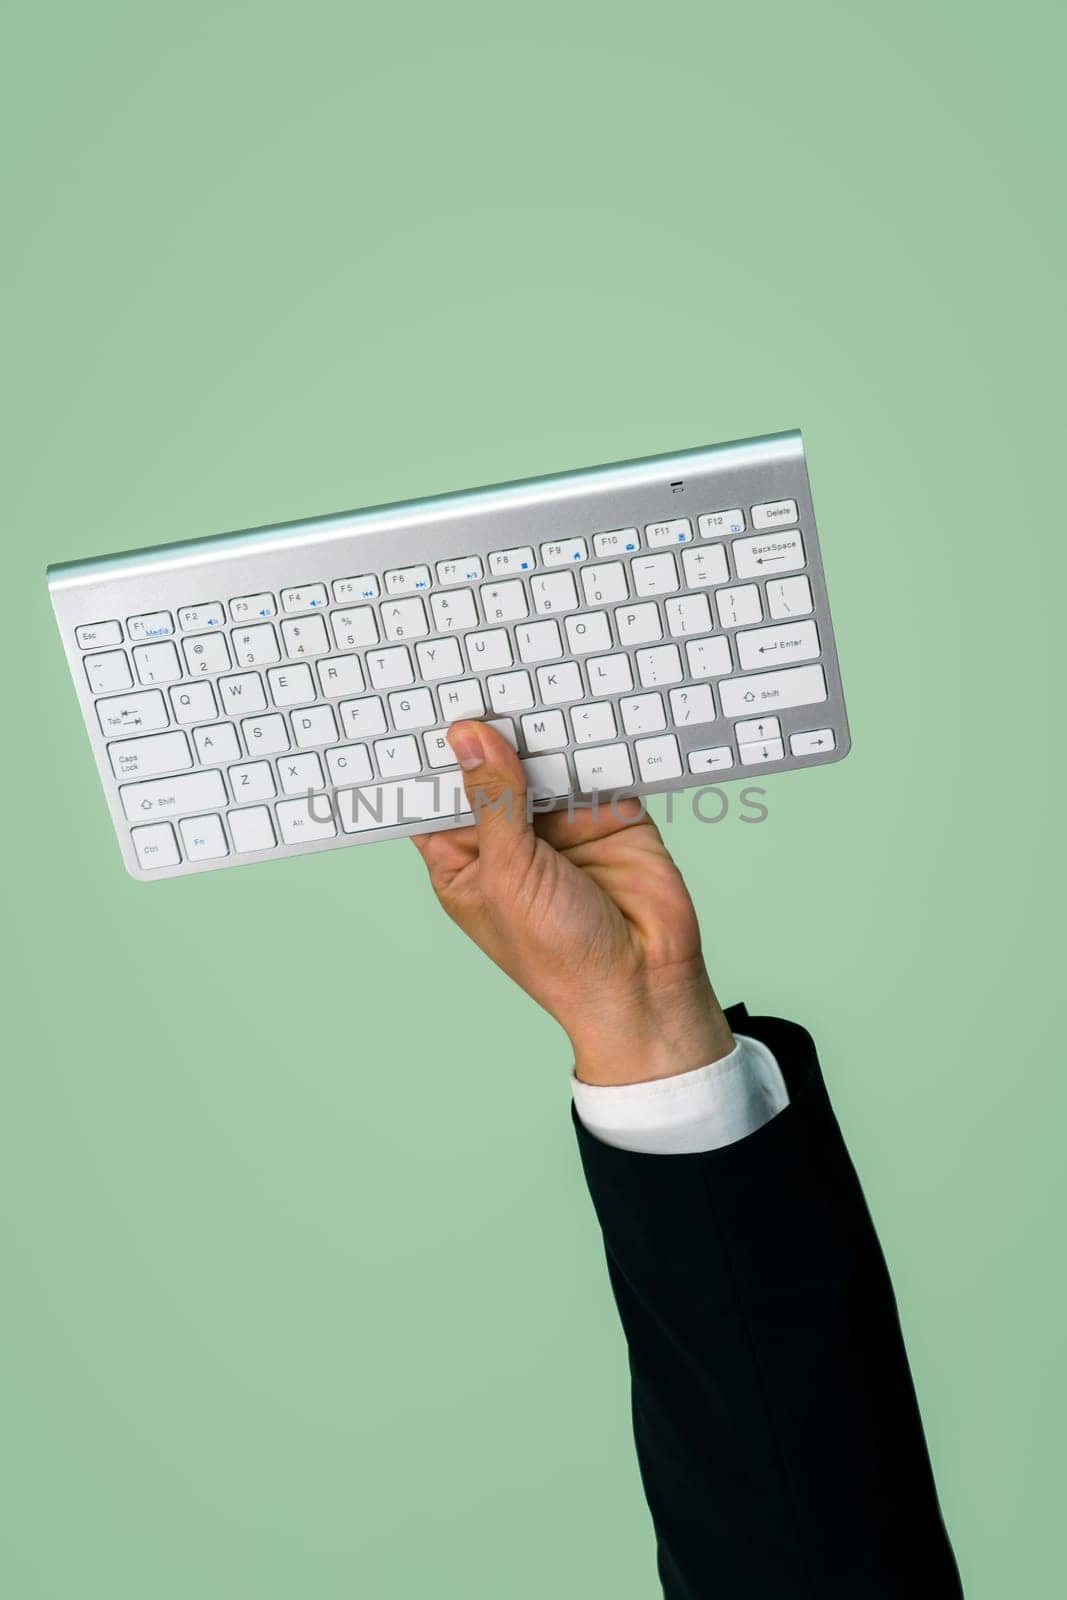 Hand holding wireless keyboard on isolated background for start up tech company. Eco-friendly green business promoting electronic waste policy idea. Quaint